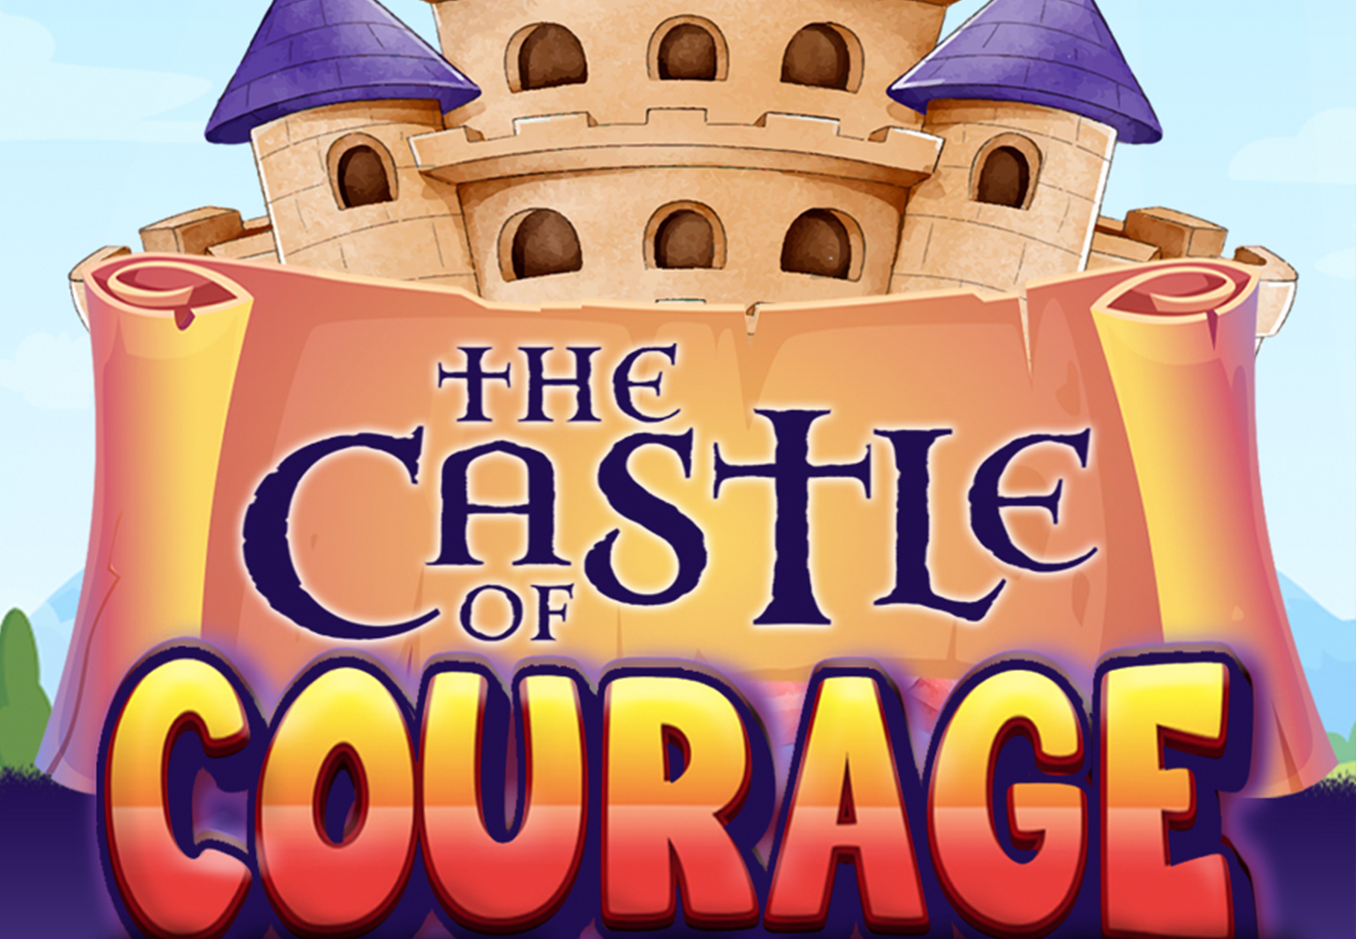 Castle of Courage VBS